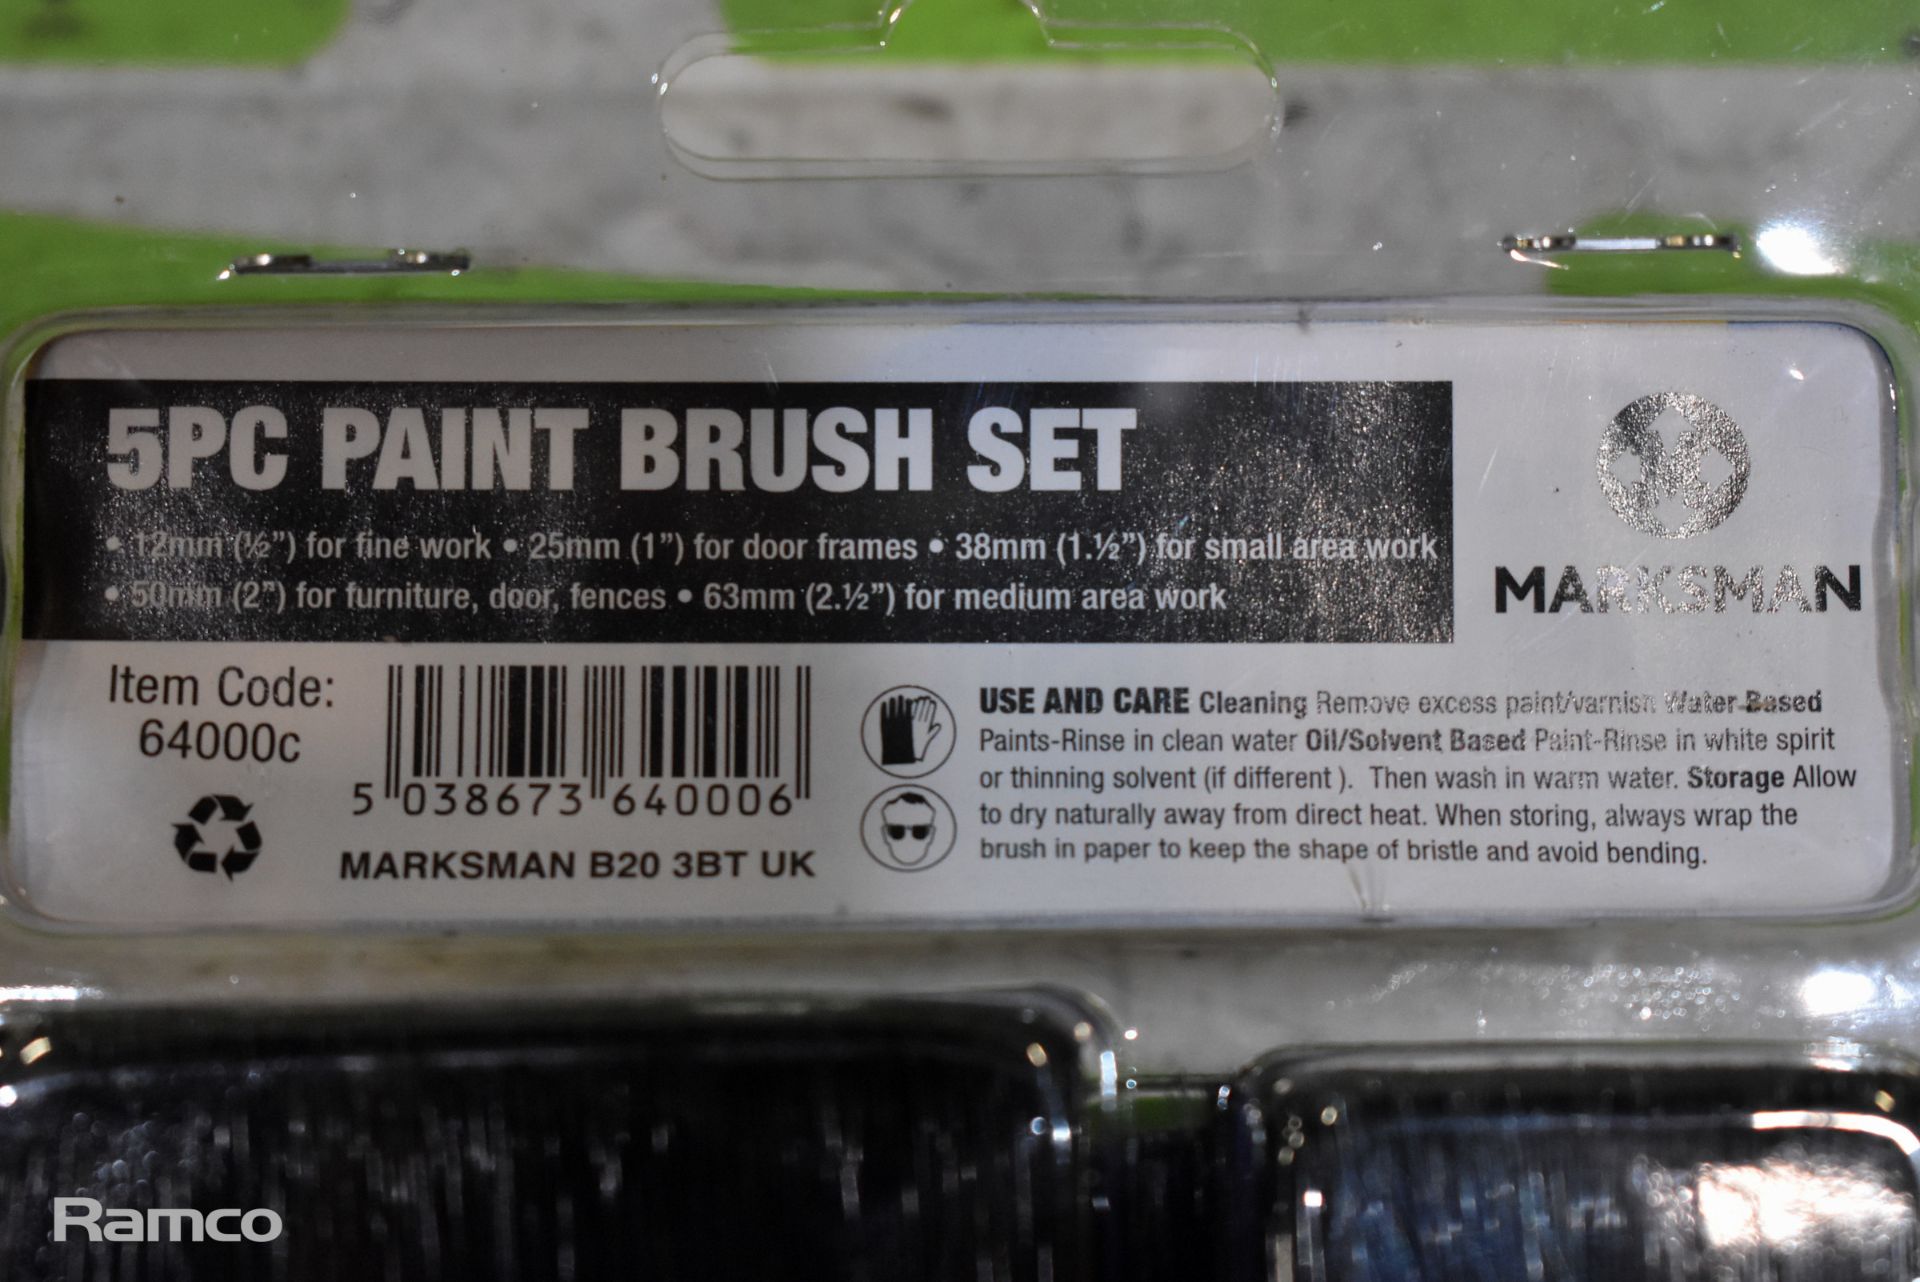 3 boxes of Marksman 5 piece paint brush sets - 48 packs per box - Image 5 of 5